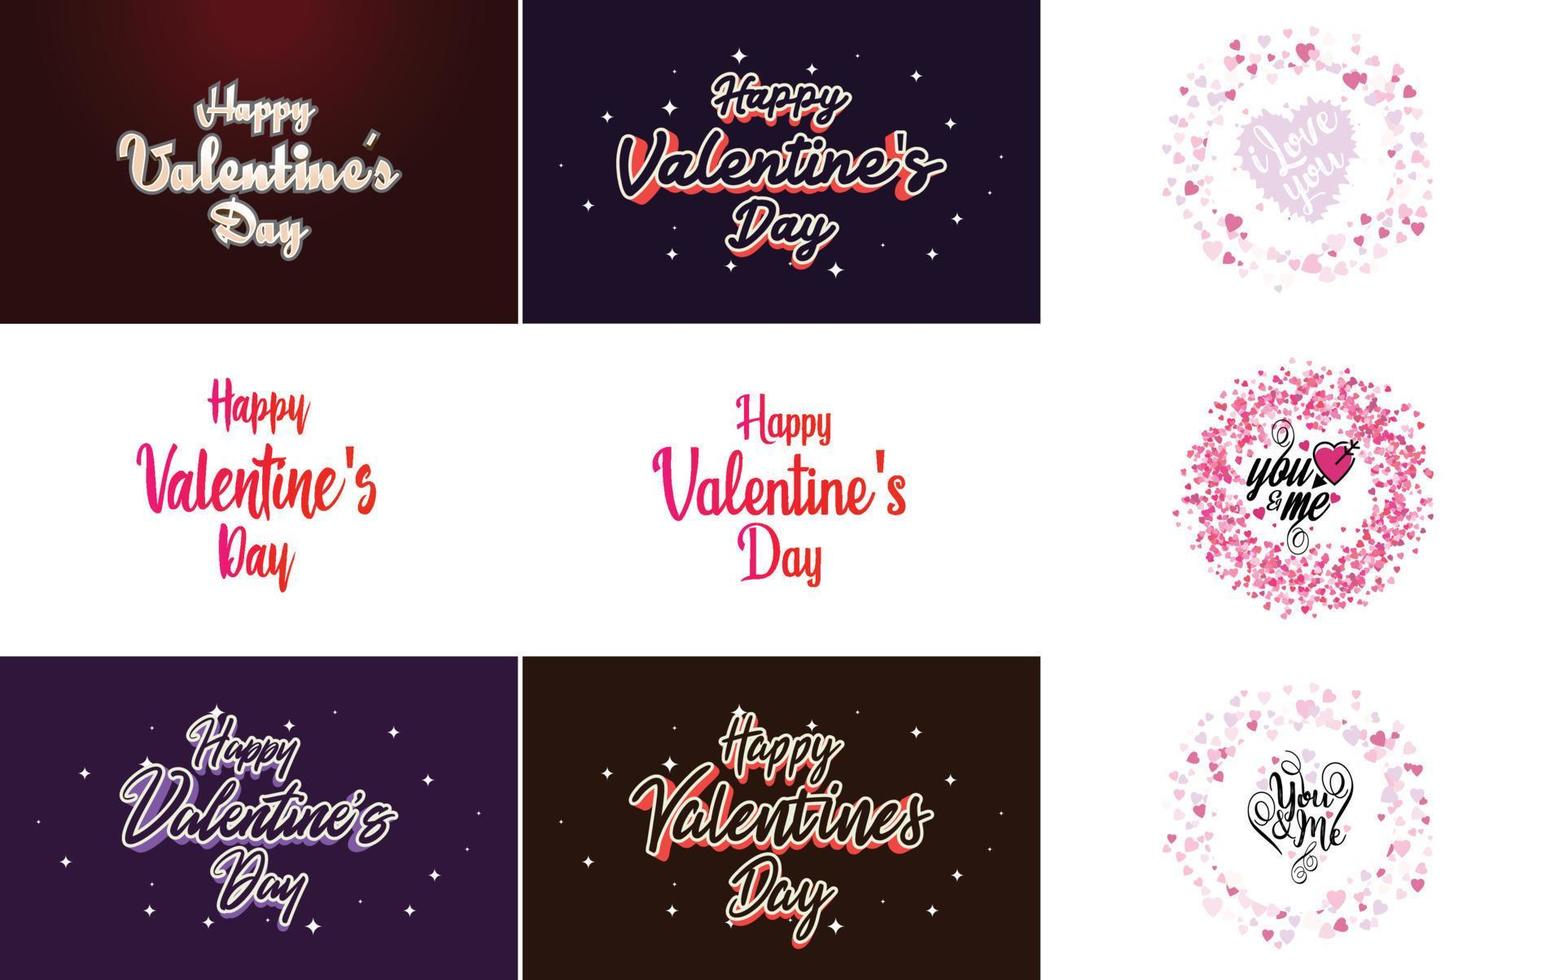 Happy Valentine's Day greeting card template with a heart theme vector